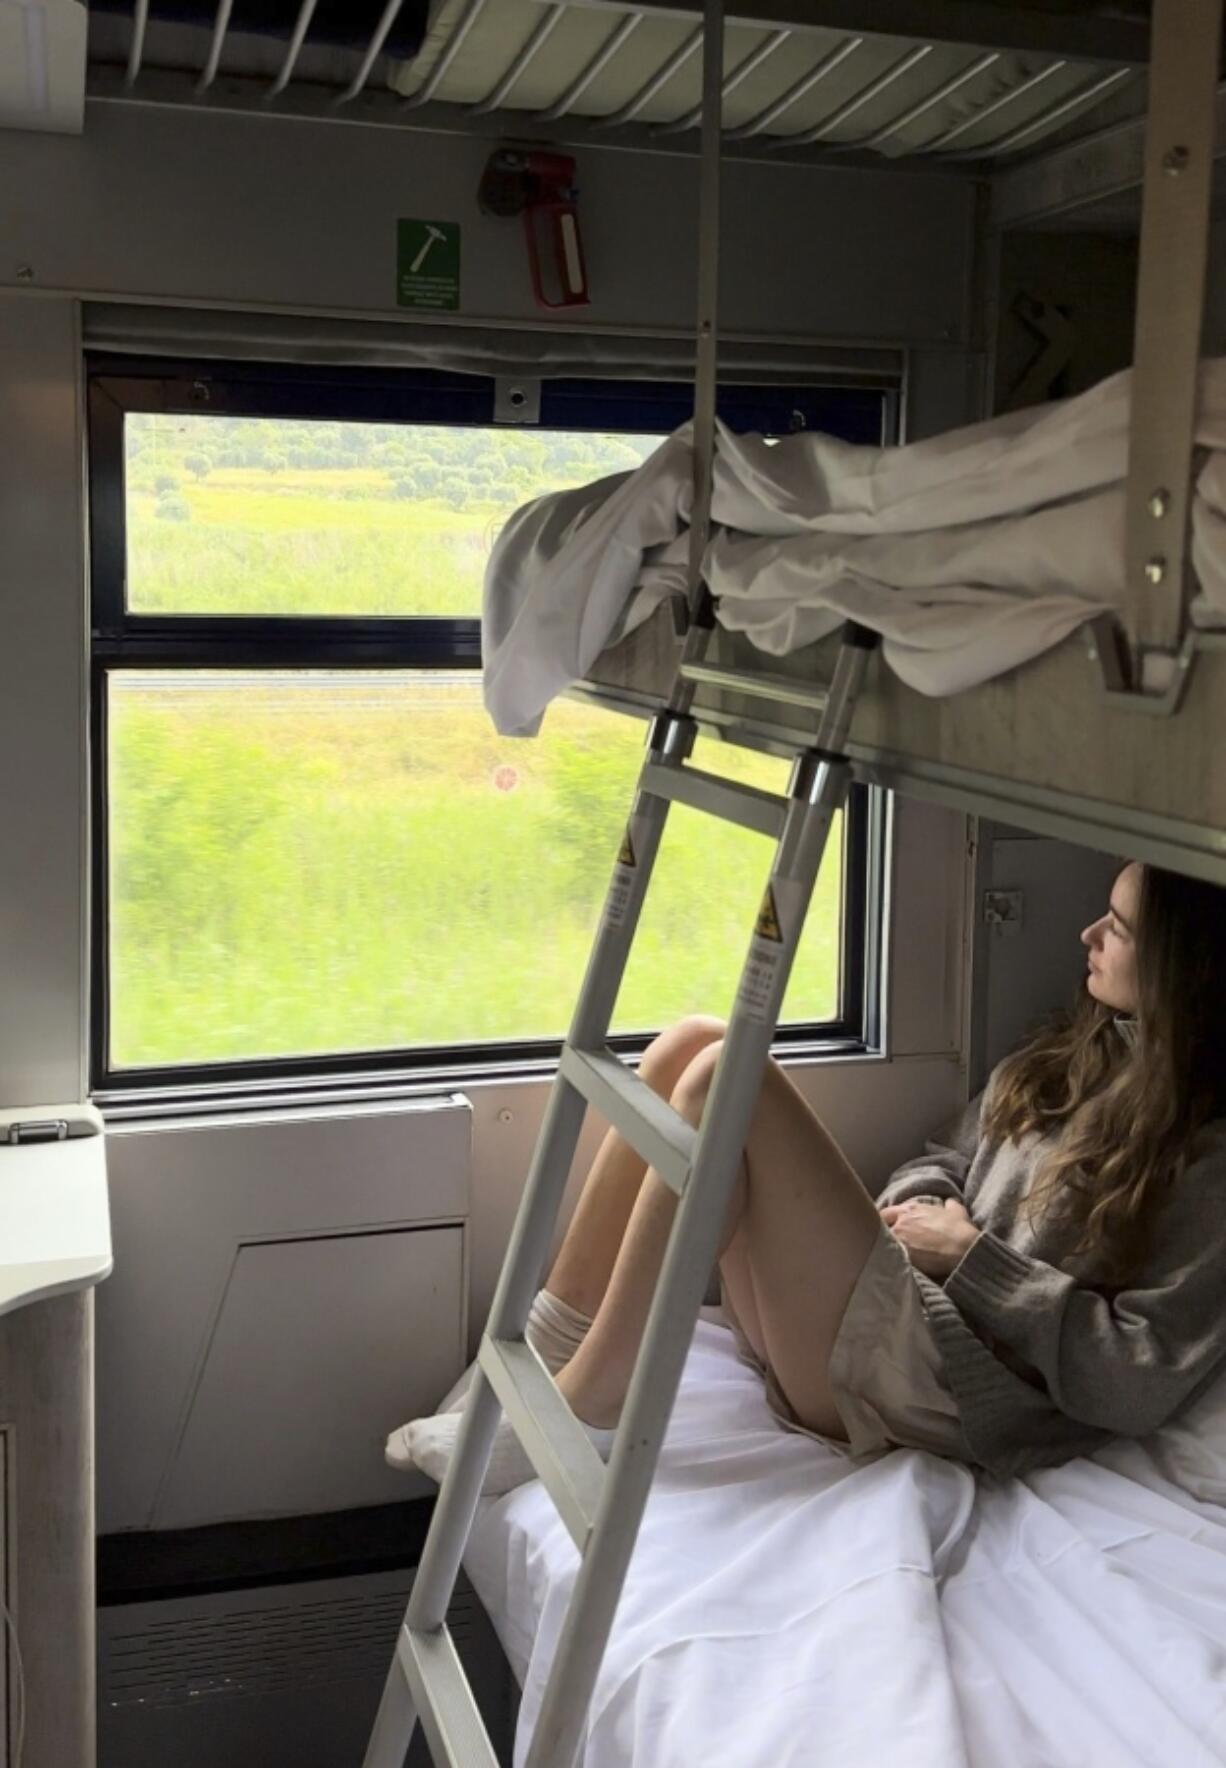 Sarah Marks of London looks out at the Italian countryside June 10 on TrenItalia&rsquo;s Intercity Notte sleeper train from Palermo to Rome.